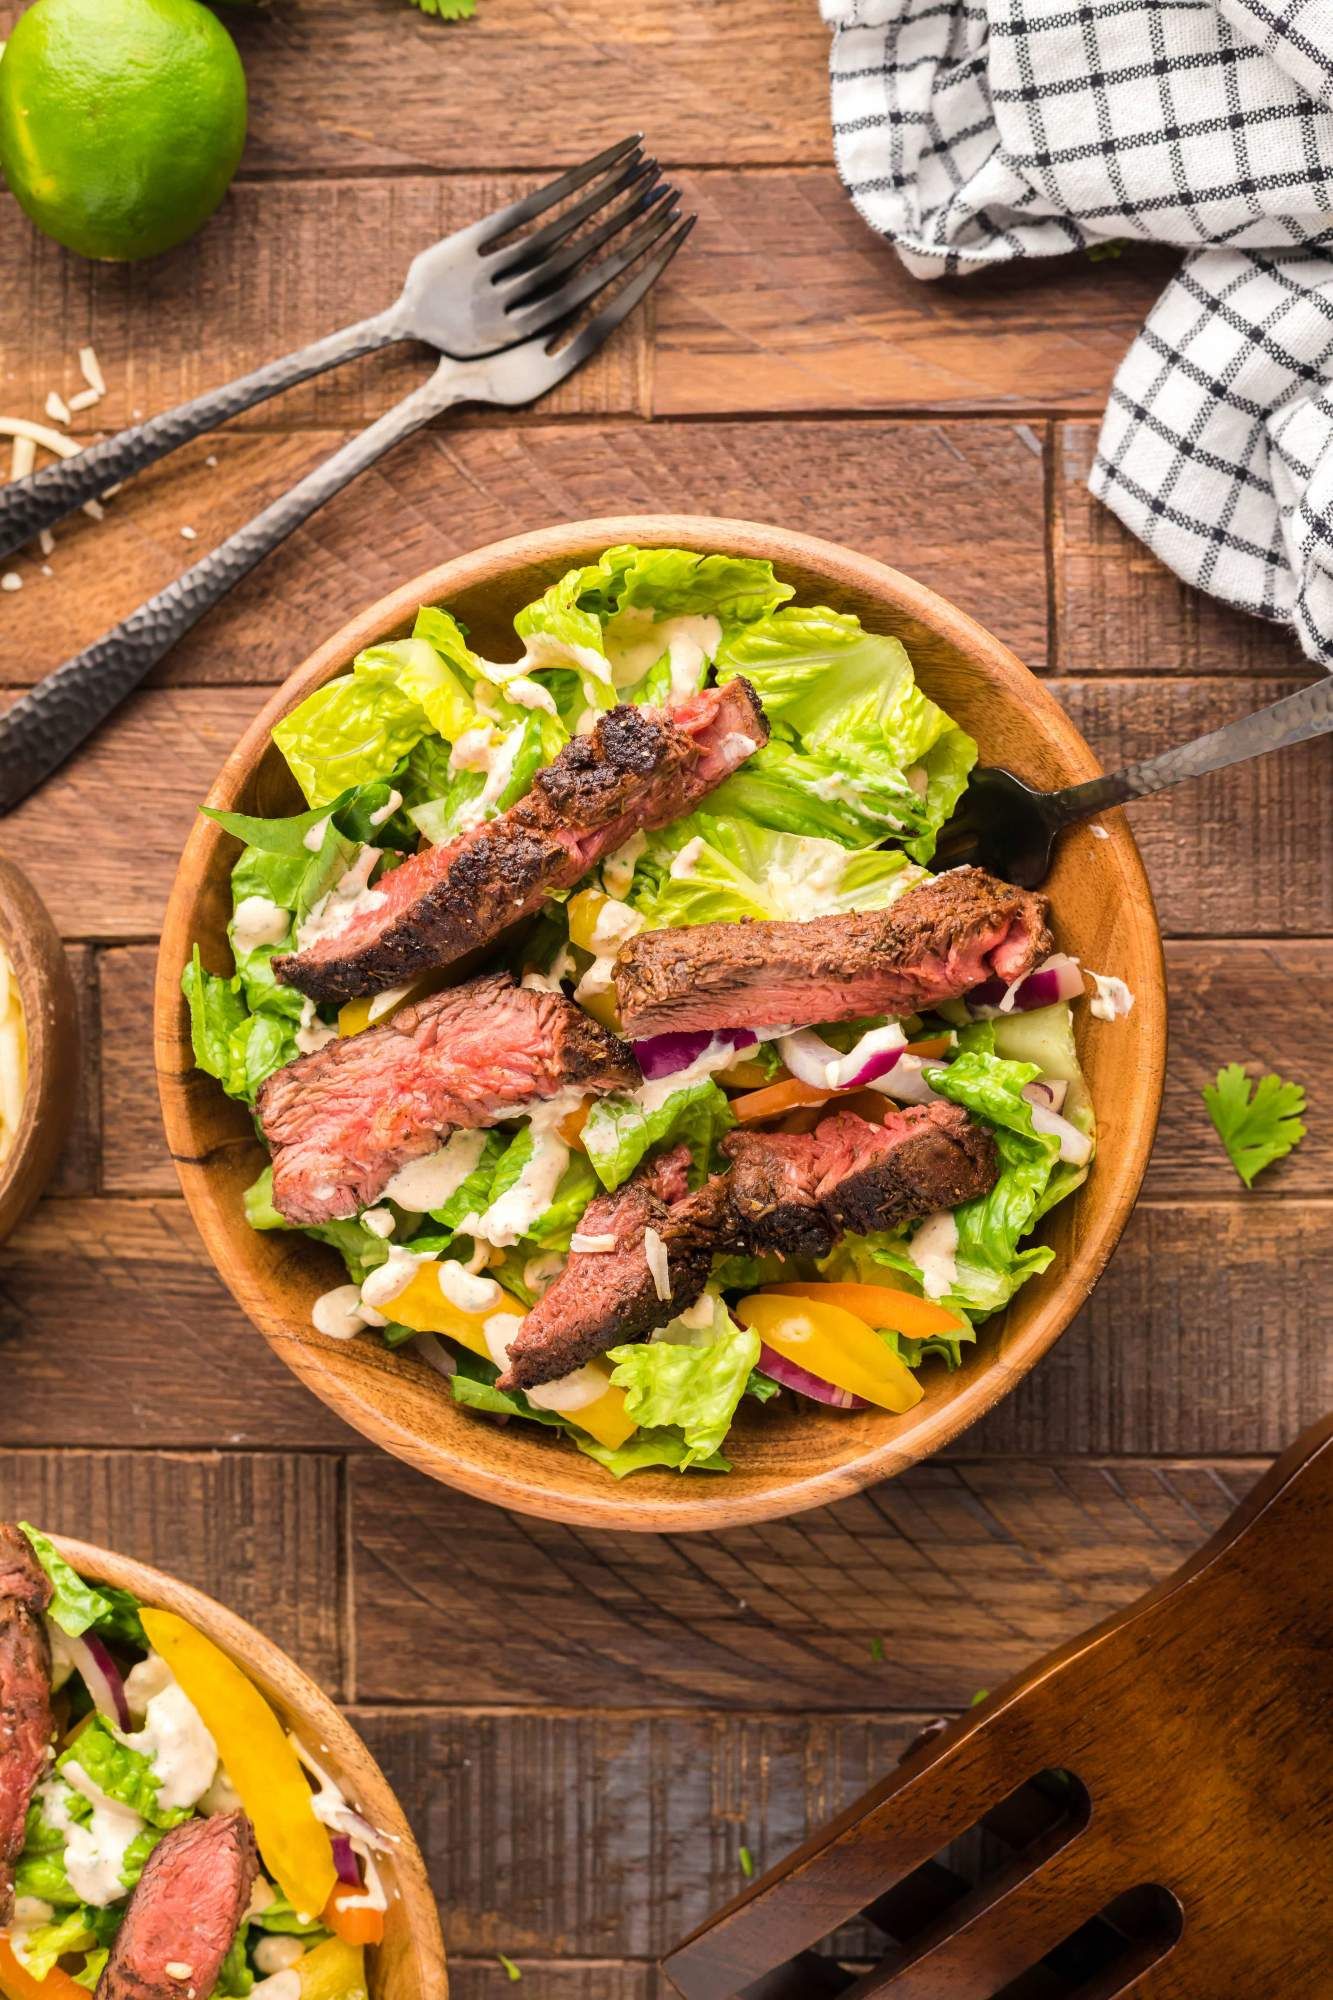 Spicy homemade steak salad with blackened steak served over lettuce, peppers, cheese, reed onion, and a creamy southwest dressing.